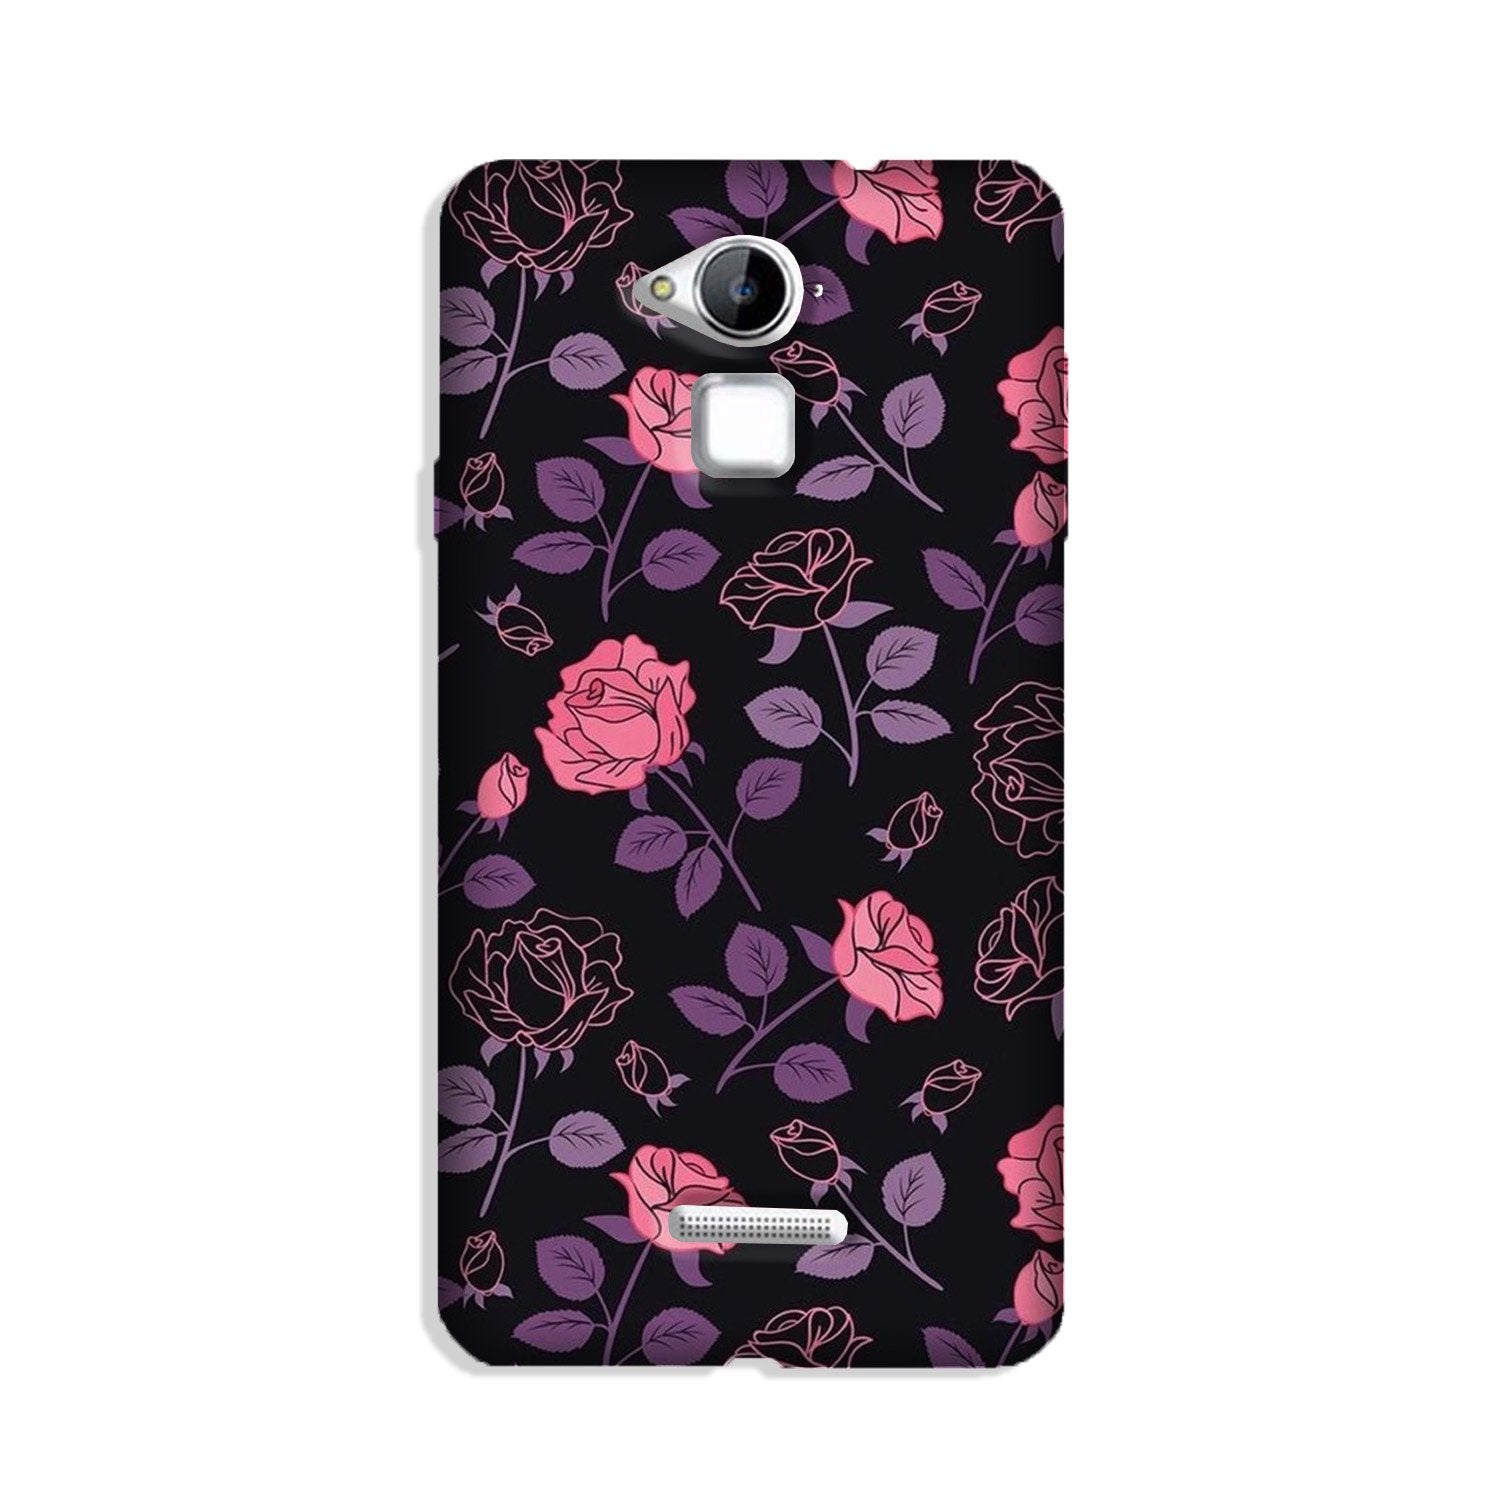 Rose Pattern Case for Coolpad Note 3